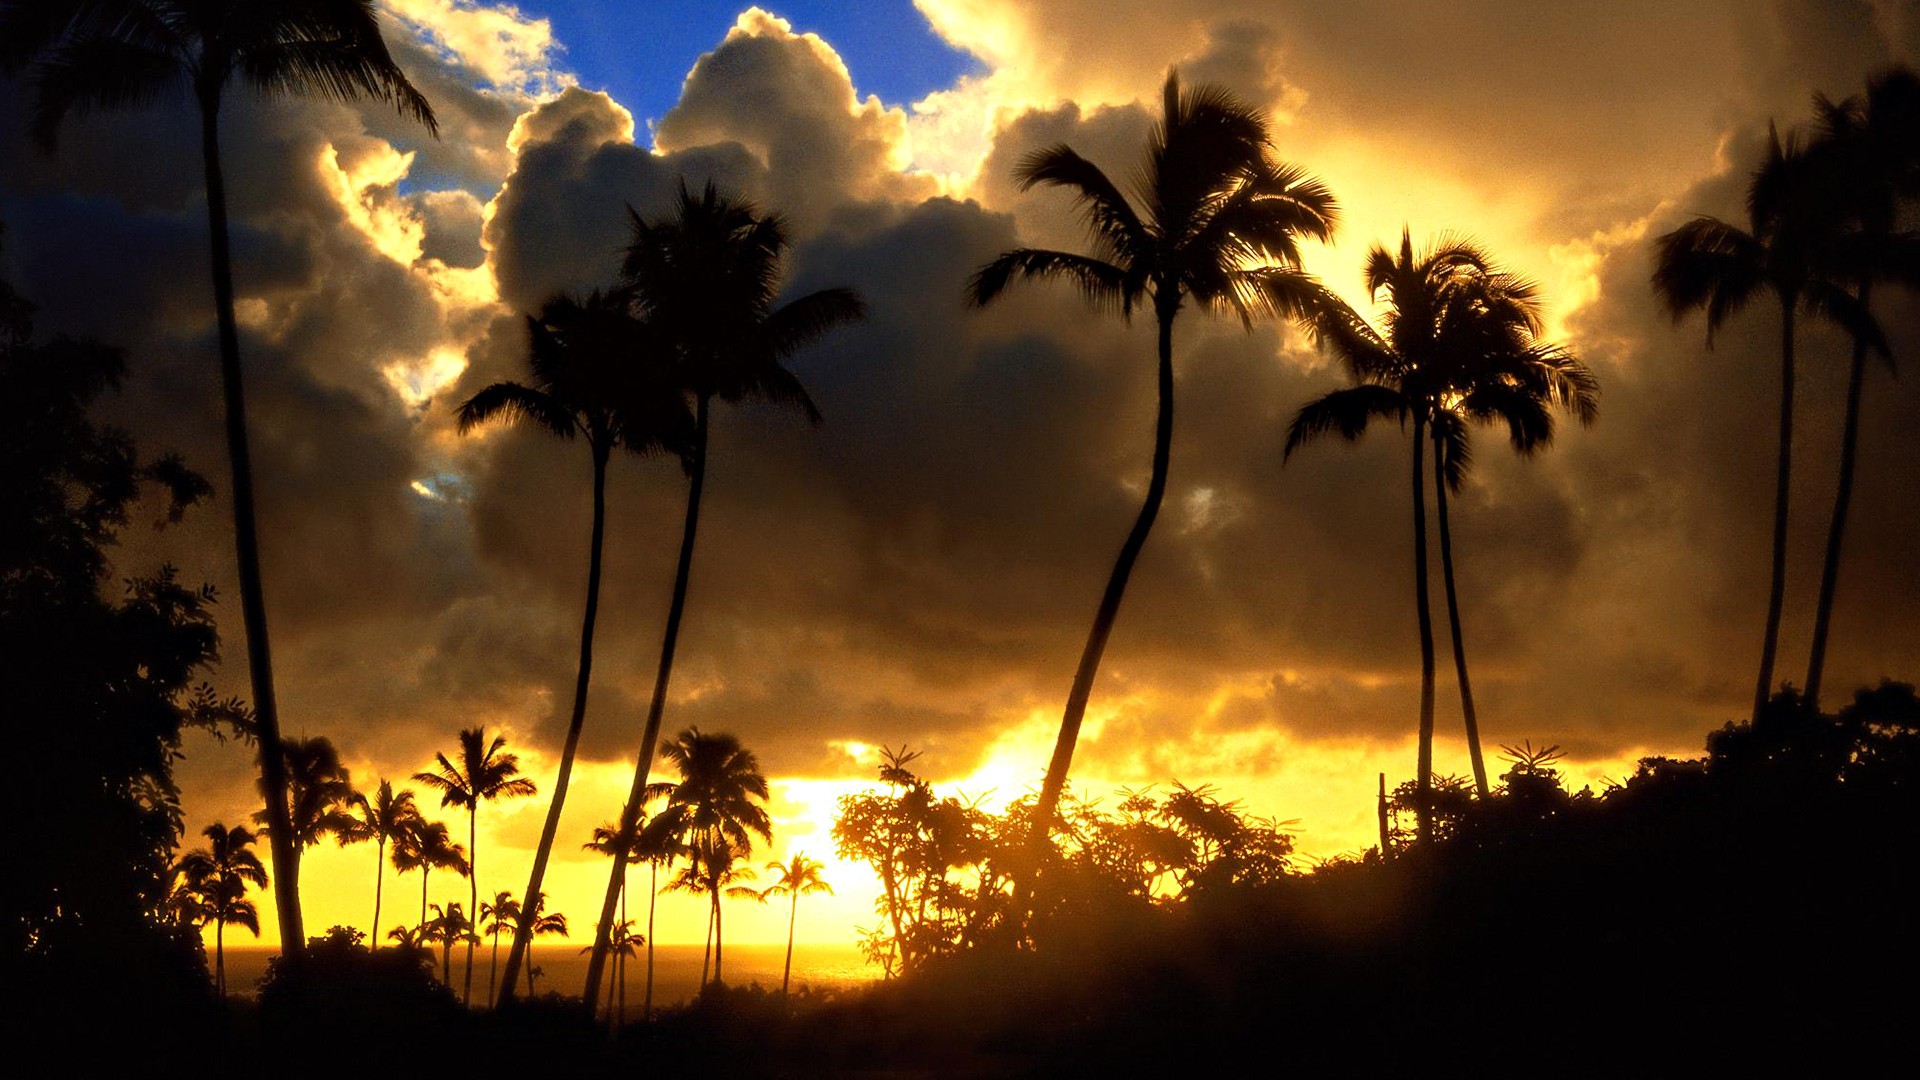 palm trees sunset wallpapers palm trees sunset wallpapers palm trees